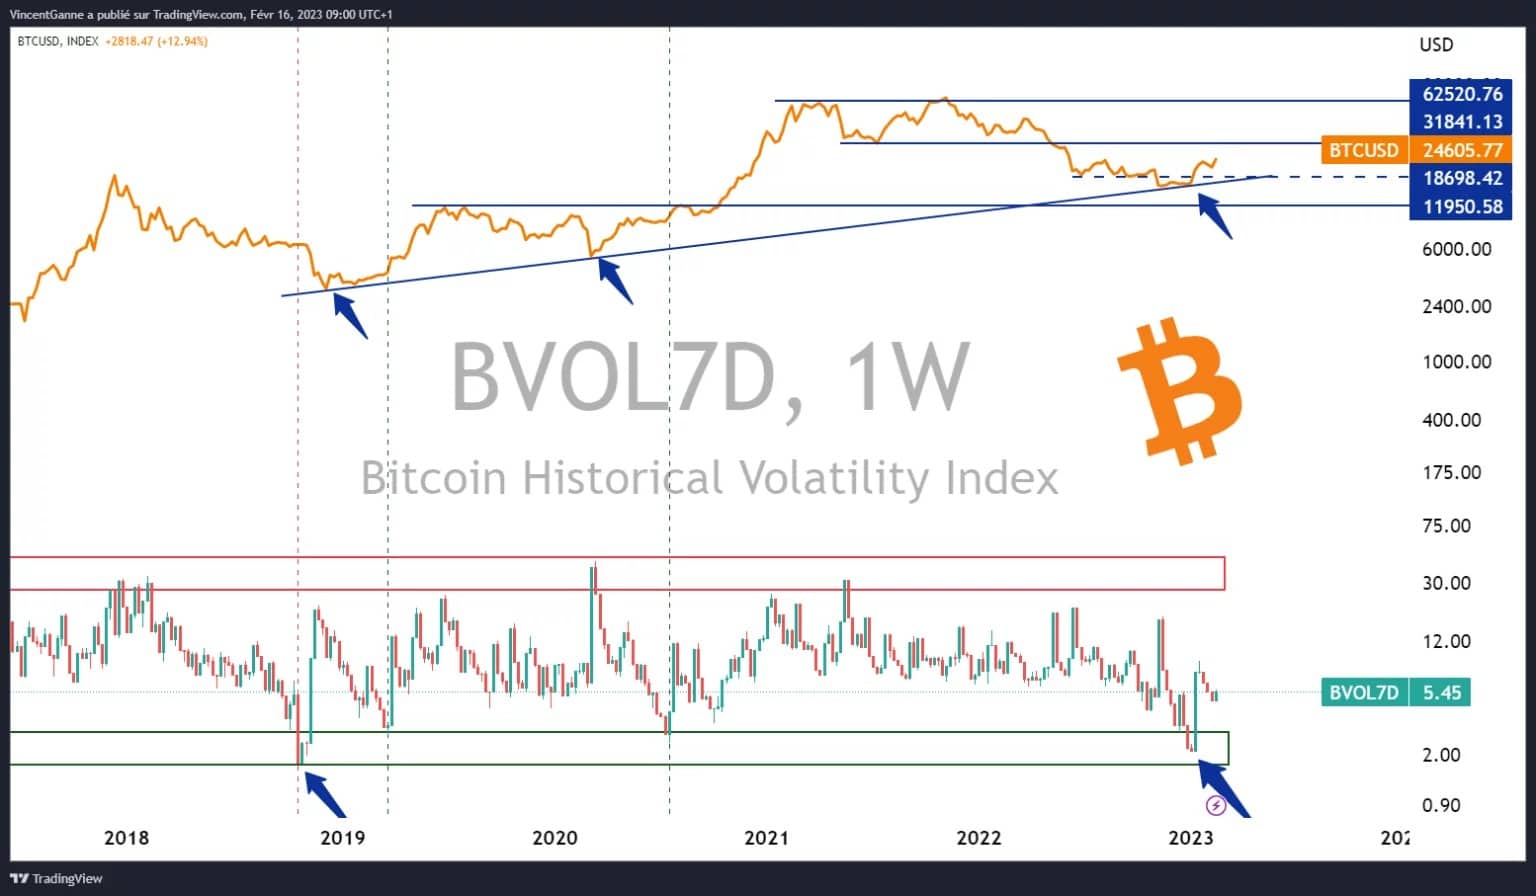 Chart showing the closing price of BTC on a weekly basis, with the 7 day volatility measure